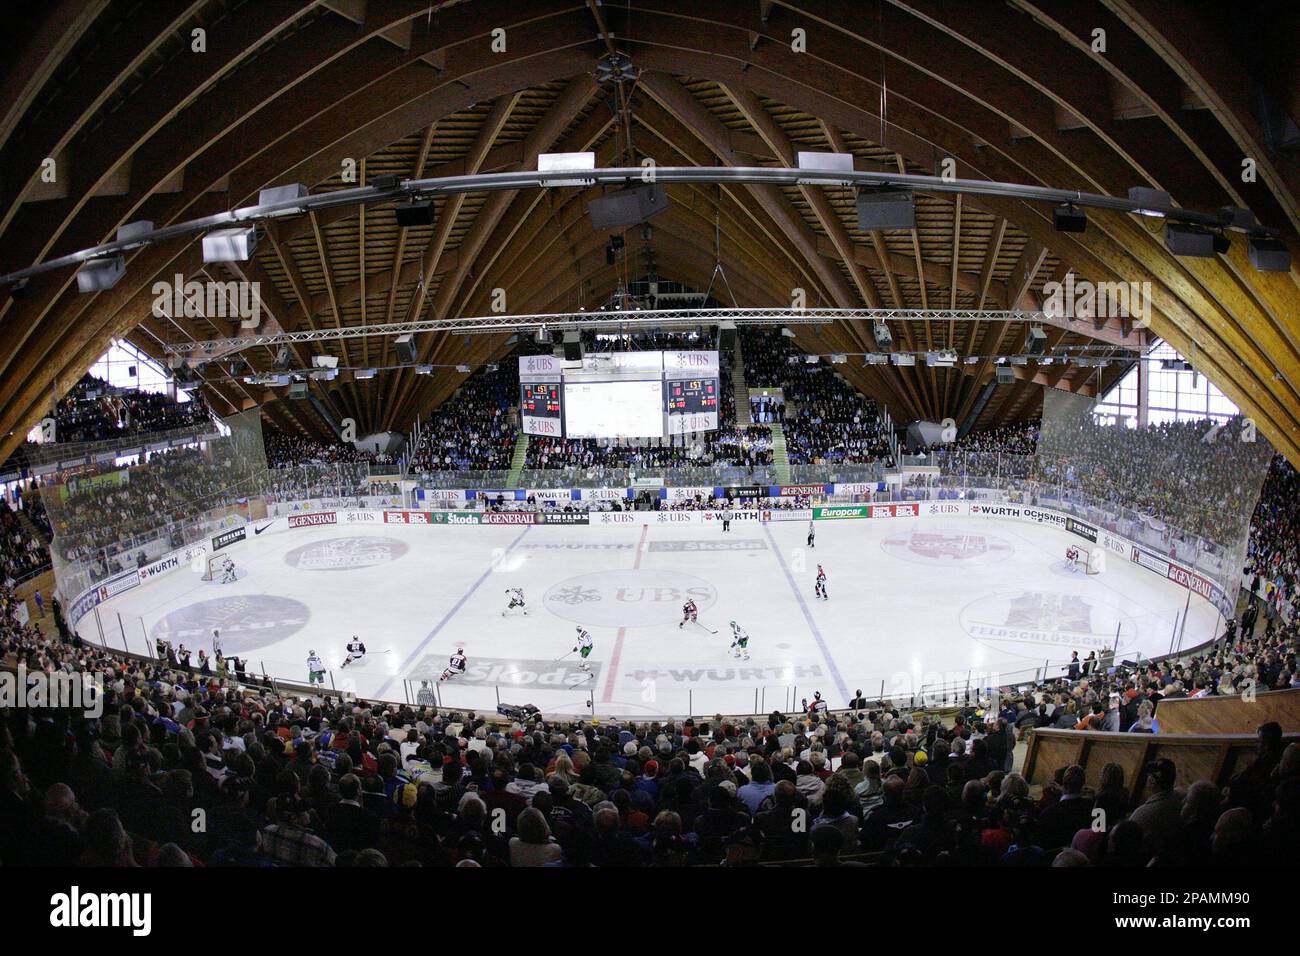 A general view of stadium during the game Salavat Yulaev Ufa against Team Canada at the 81th Spengler Cup ice hockey tournament, in Davos, Switzerland, Saturday, December 29, 2007